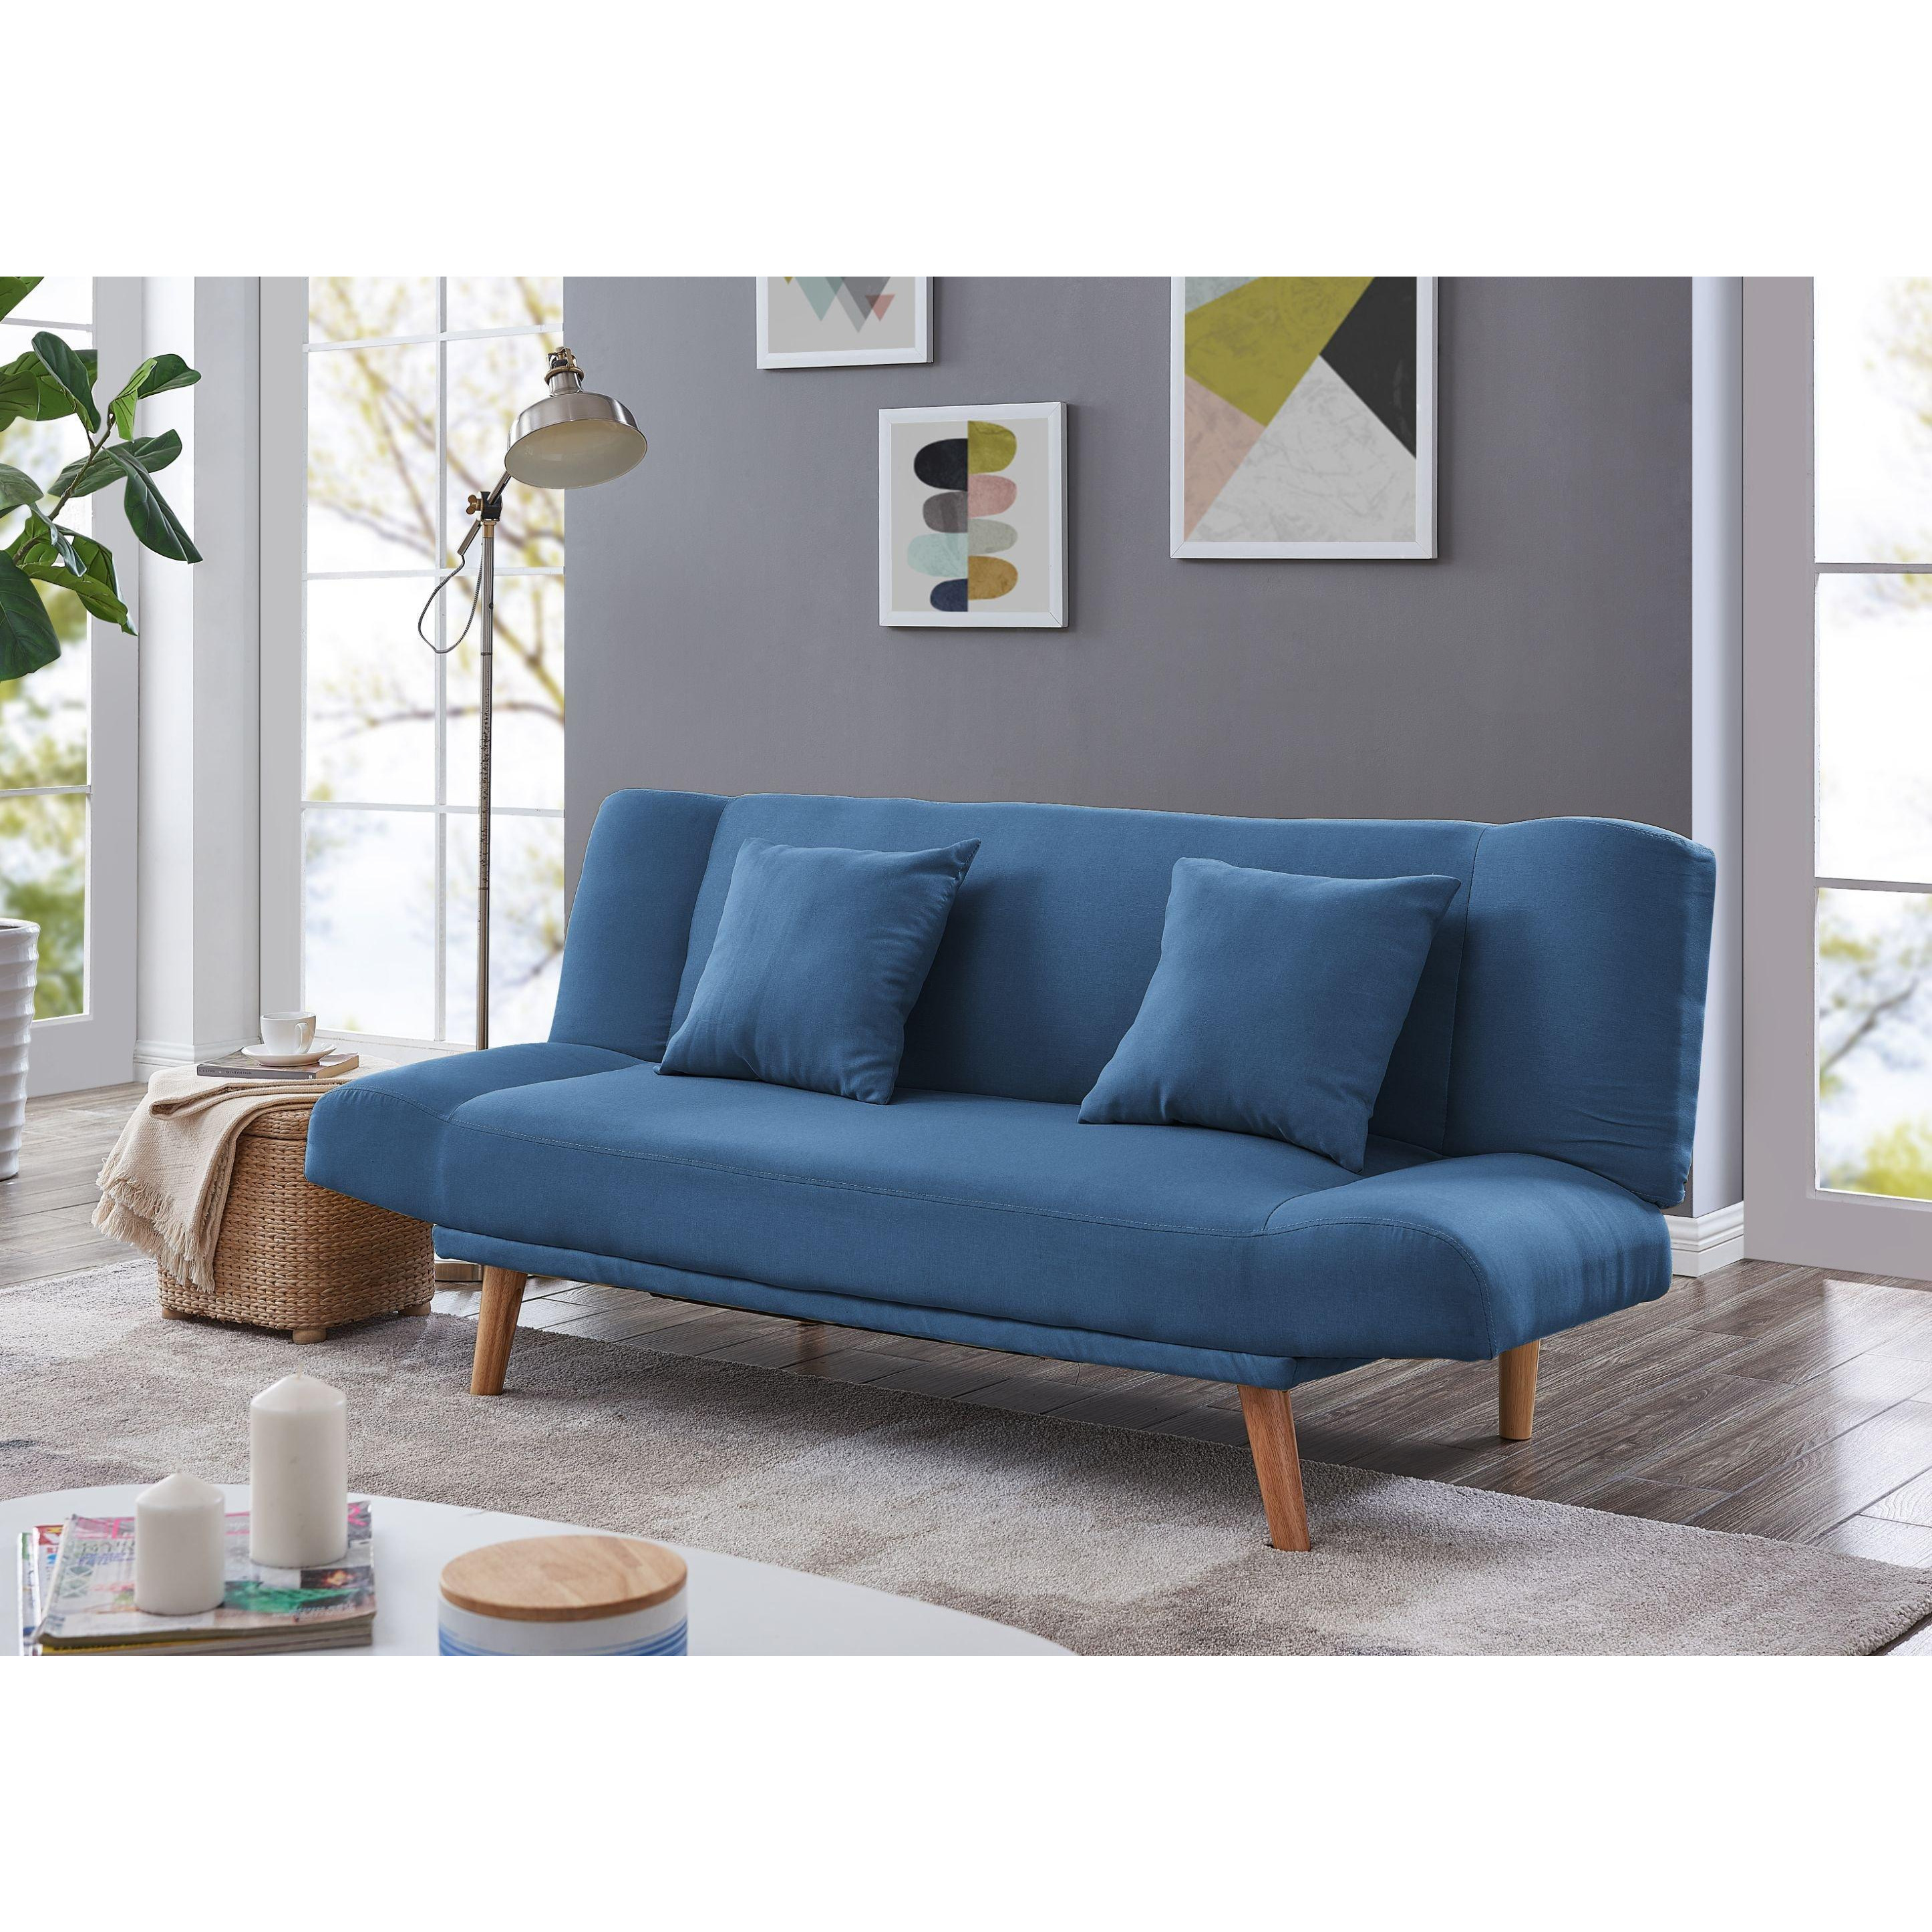 Hamilton Fabric Sofa Bed With Matching Scatter Cushions and Wooden Legs - image 1